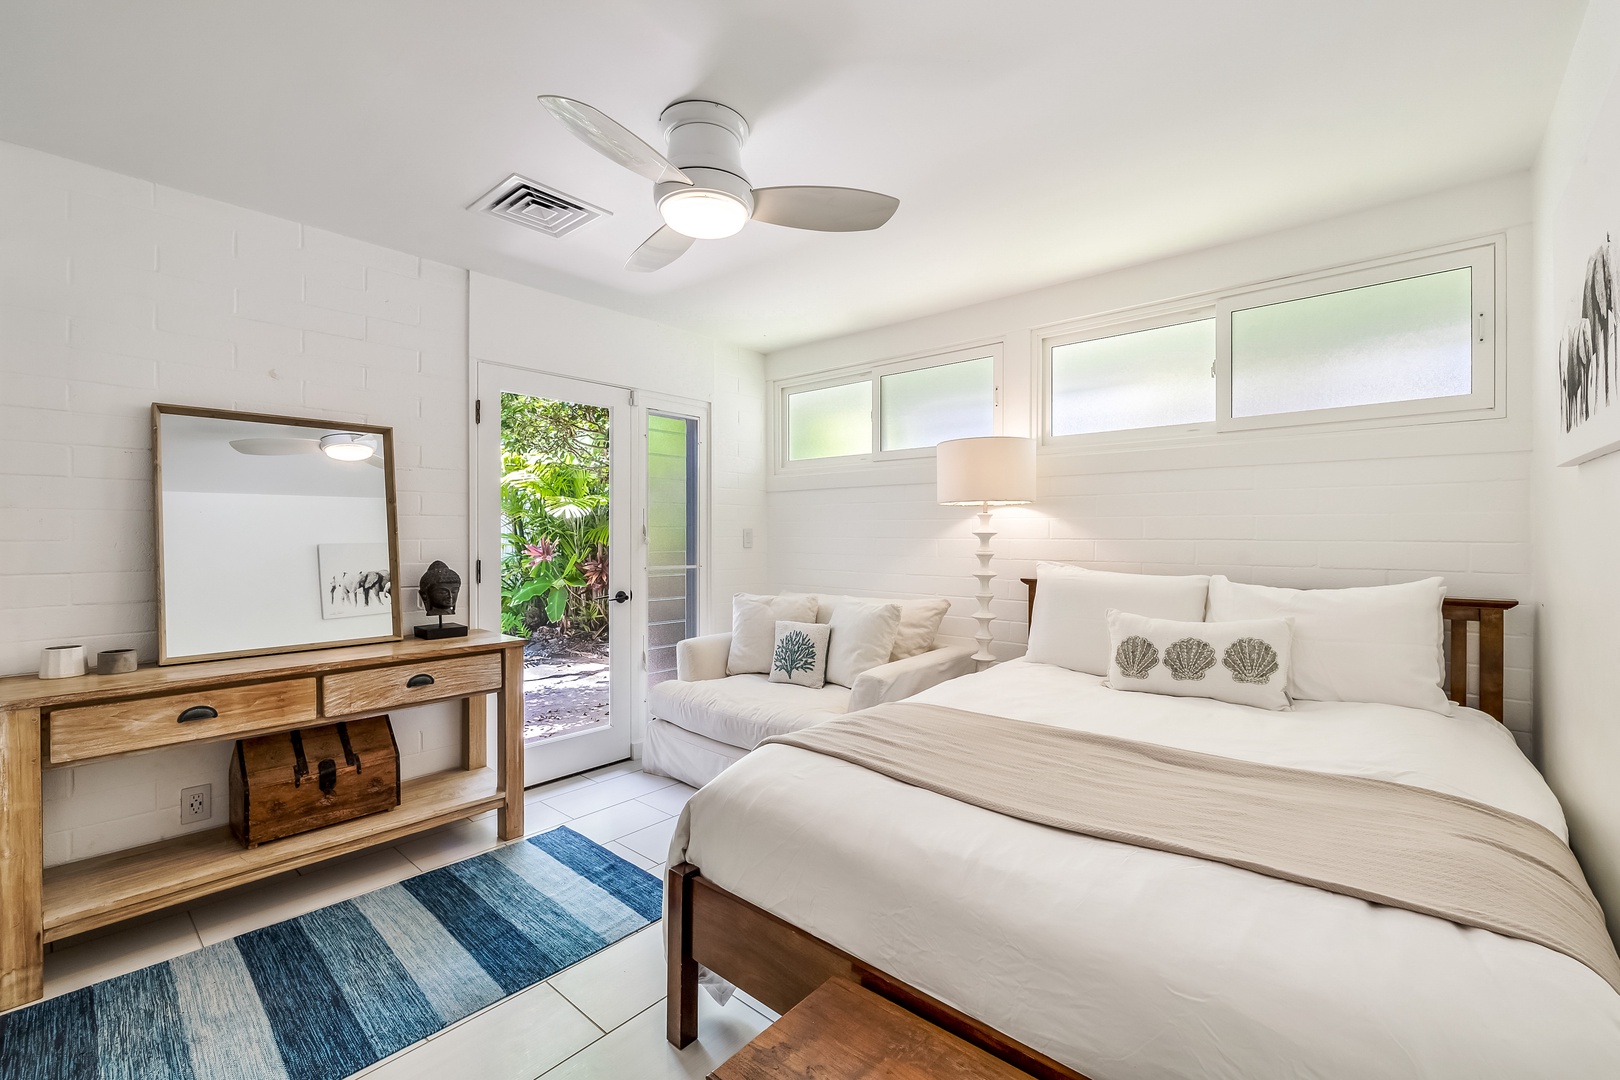 Kailua Vacation Rentals, Hale Ohana - Guest Bedroom 2 features a queen bed, garden view, love seat, and ceiling fan